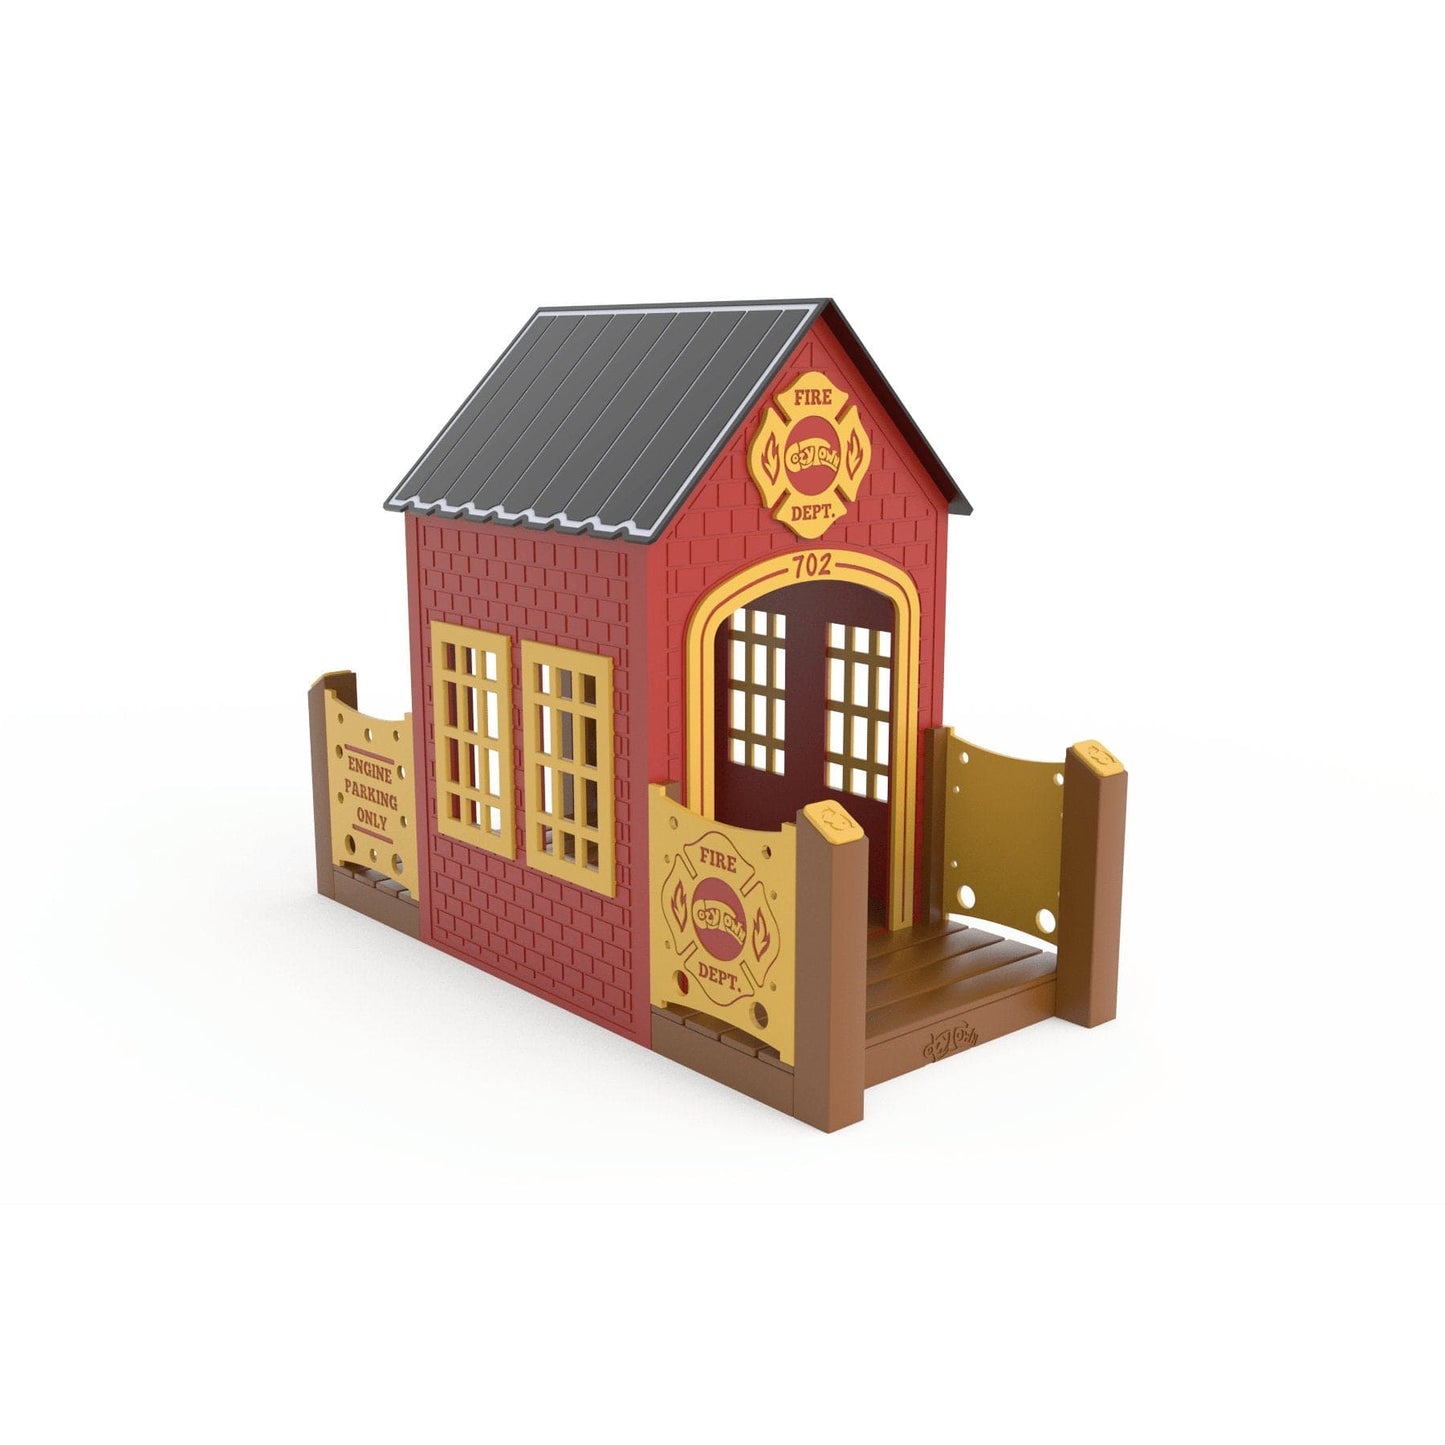 CozyTown Fire Station-Outdoor Playhouse